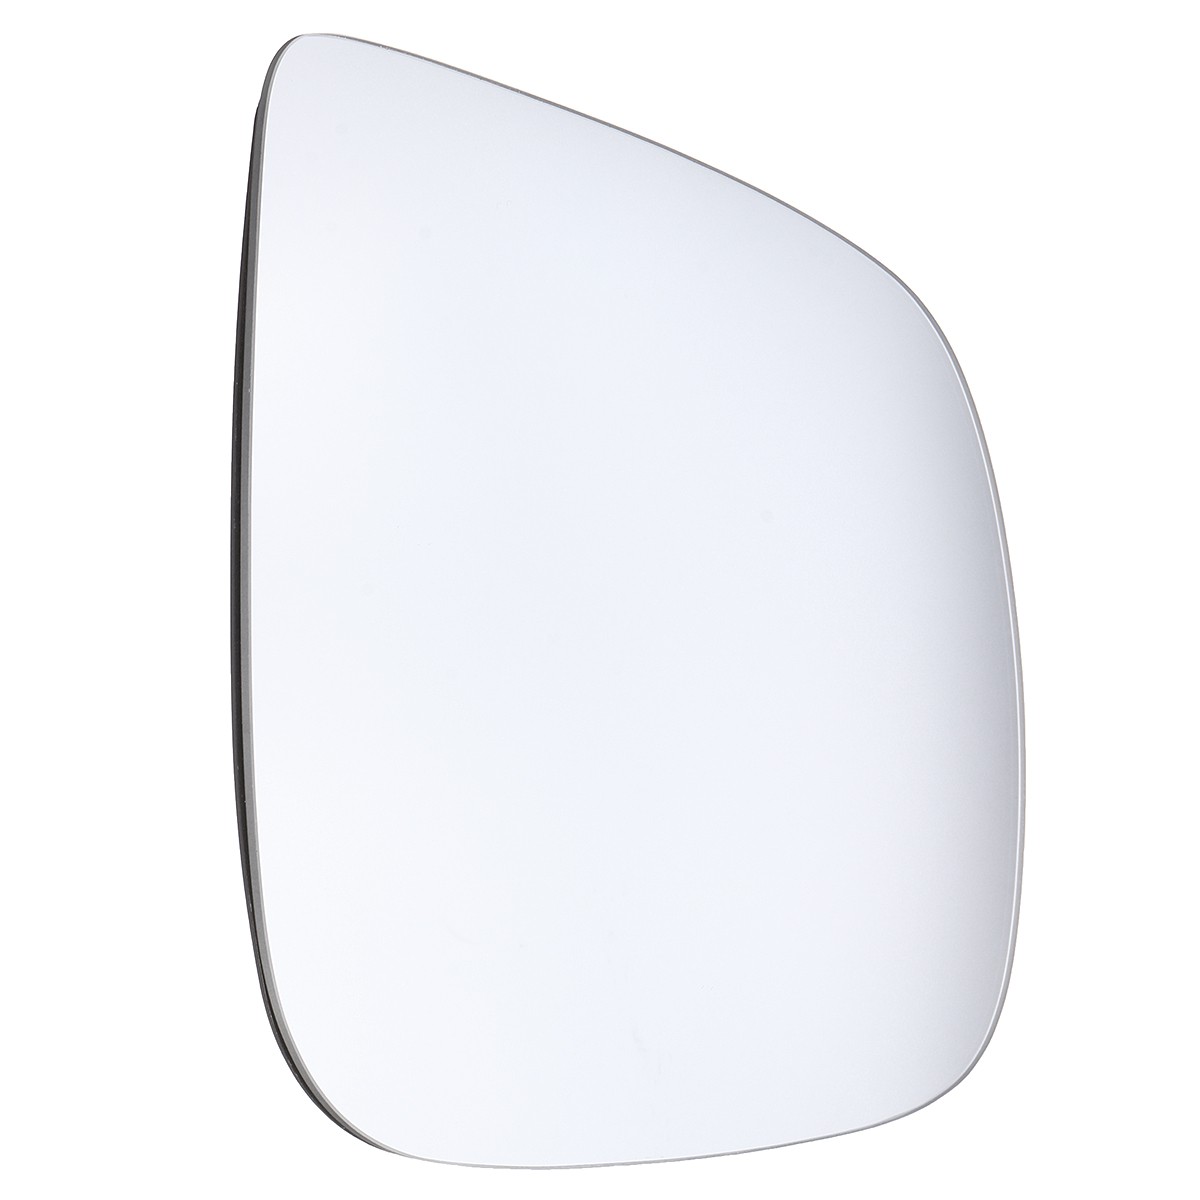 Car-Right-Passenger-Side-Door-Wing-Mirror-Glass-Heated-For-AUDI-Q5-09-17-Q7-10-15-1176571